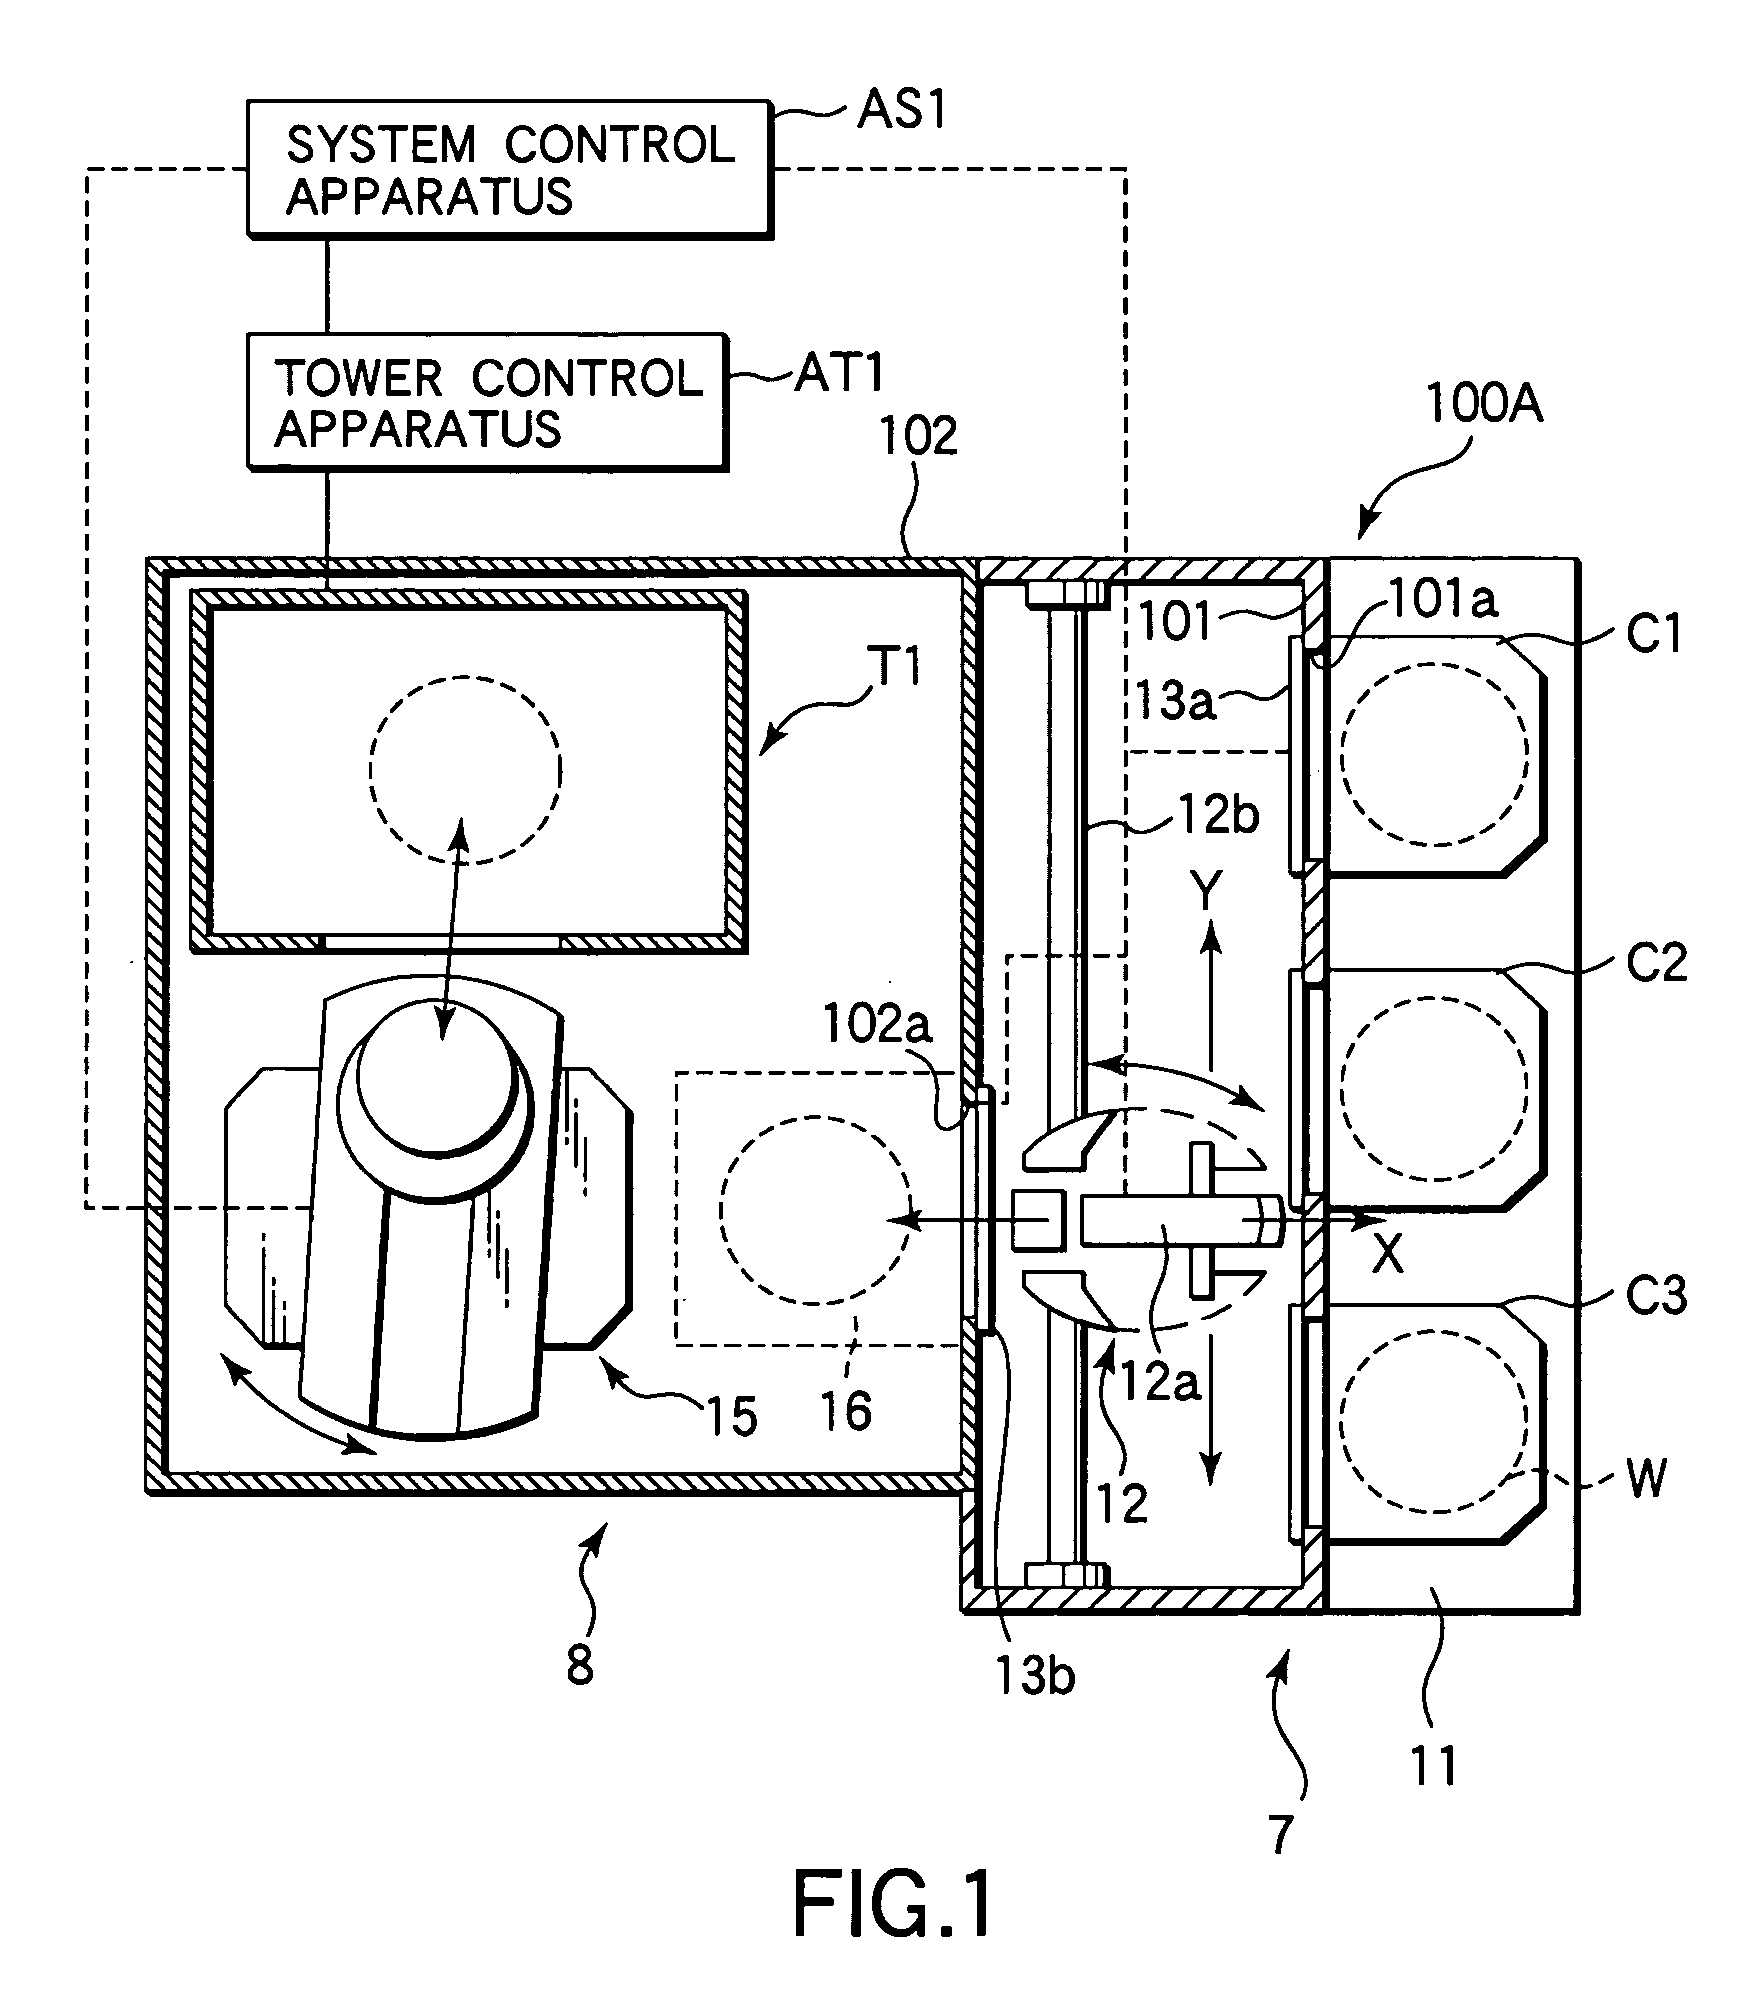 Insulation film formation device